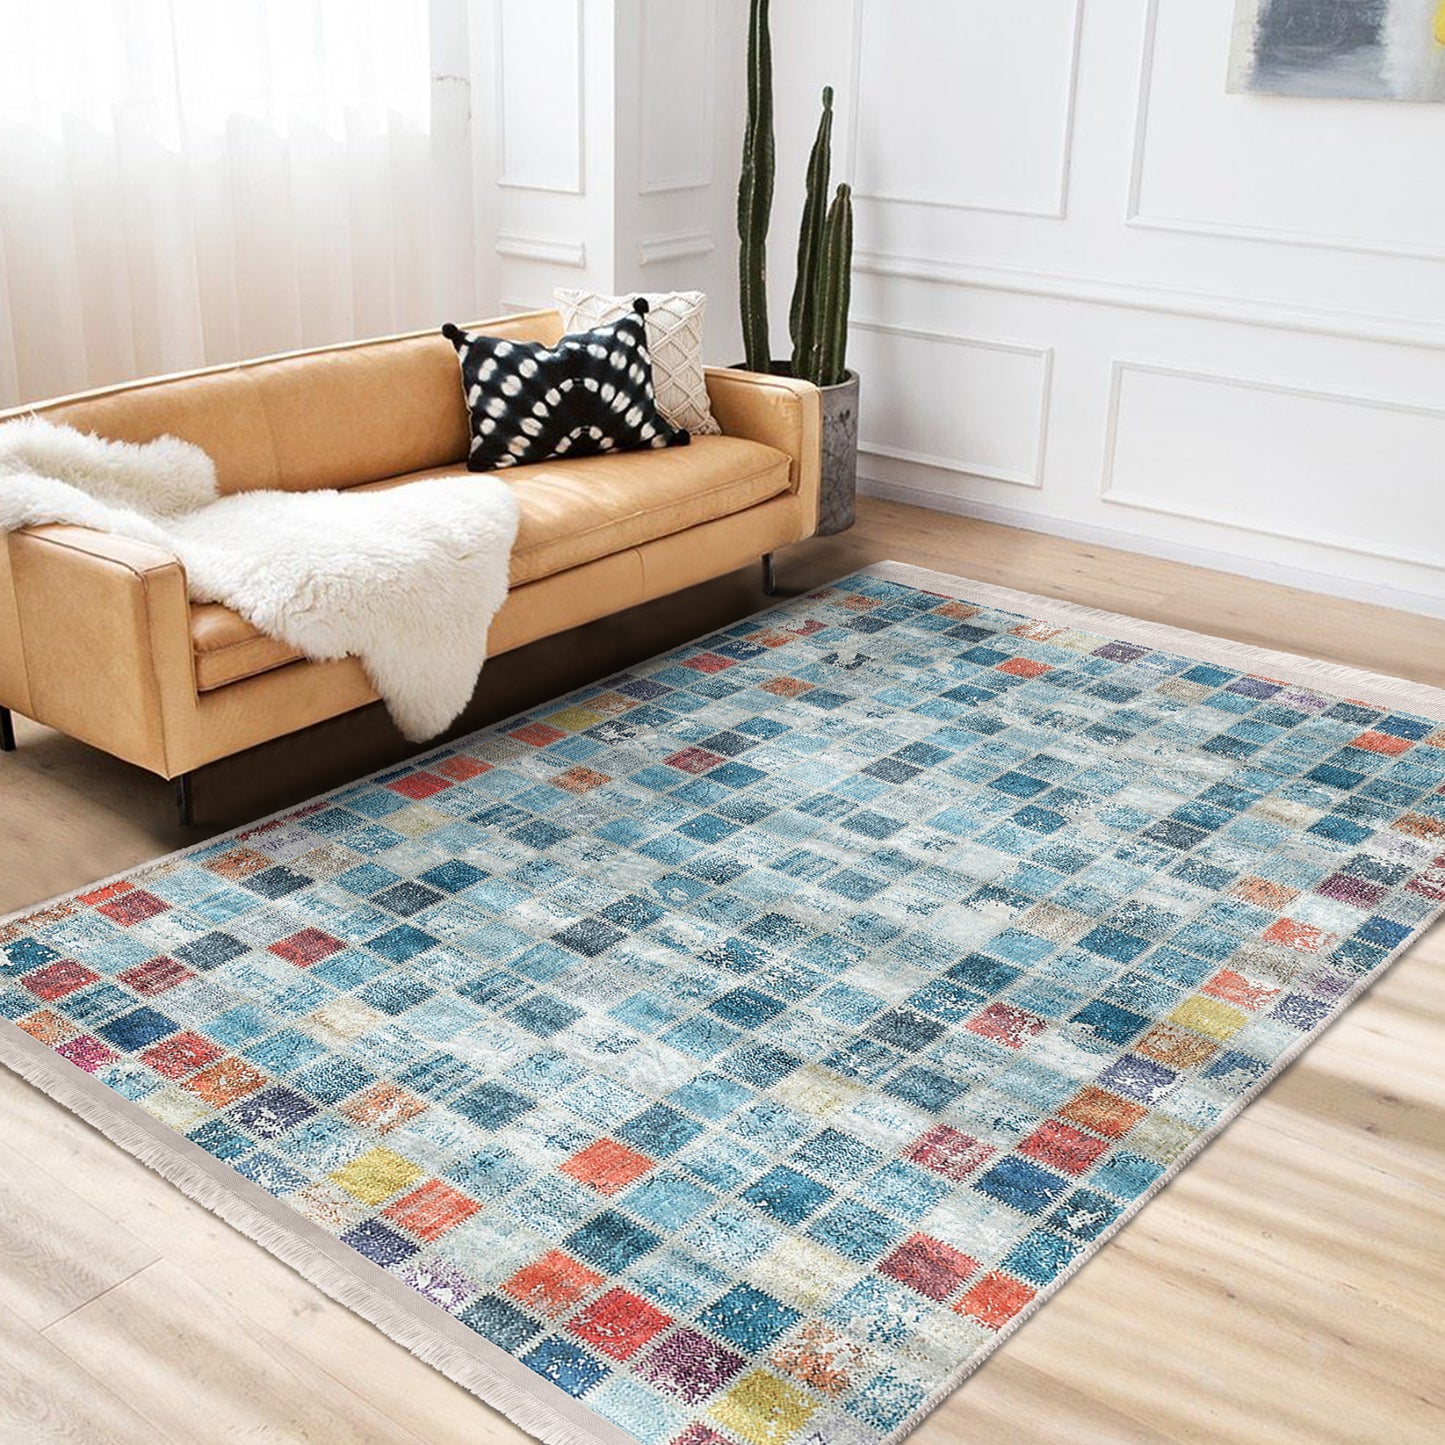 Rustic Checkered Pattern Rug for Farmhouse Decor